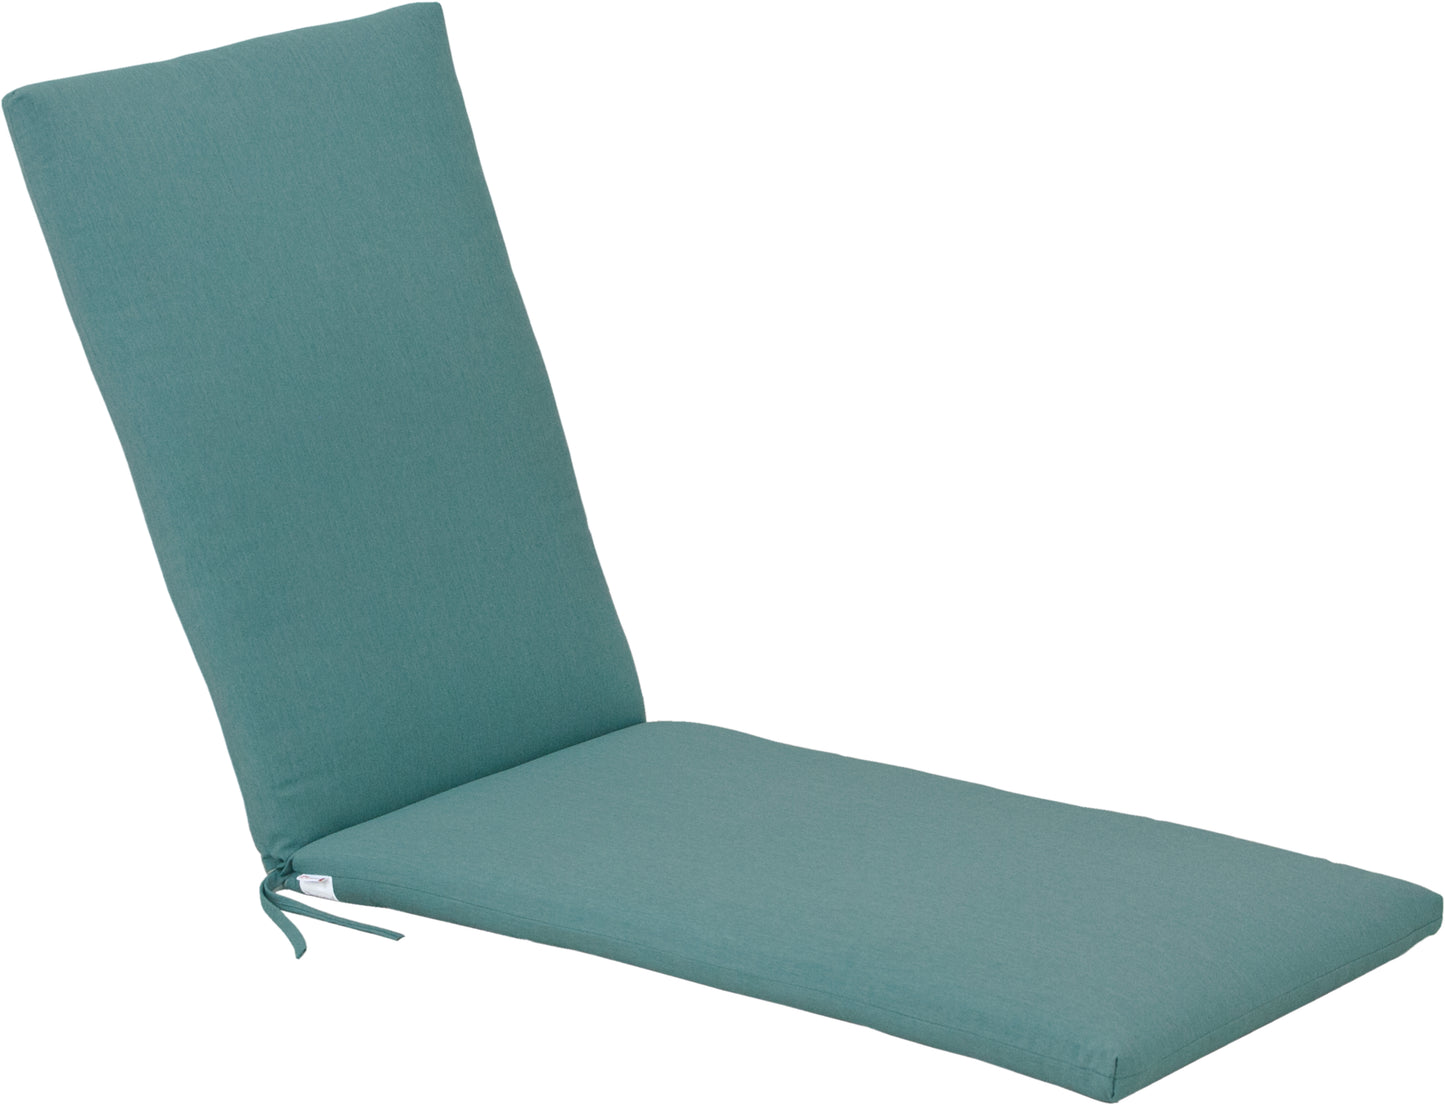 LuxCraft Lounge Chair Cushion  - LEAD TIME TO SHIP 10 to 12 BUSINESS DAYS